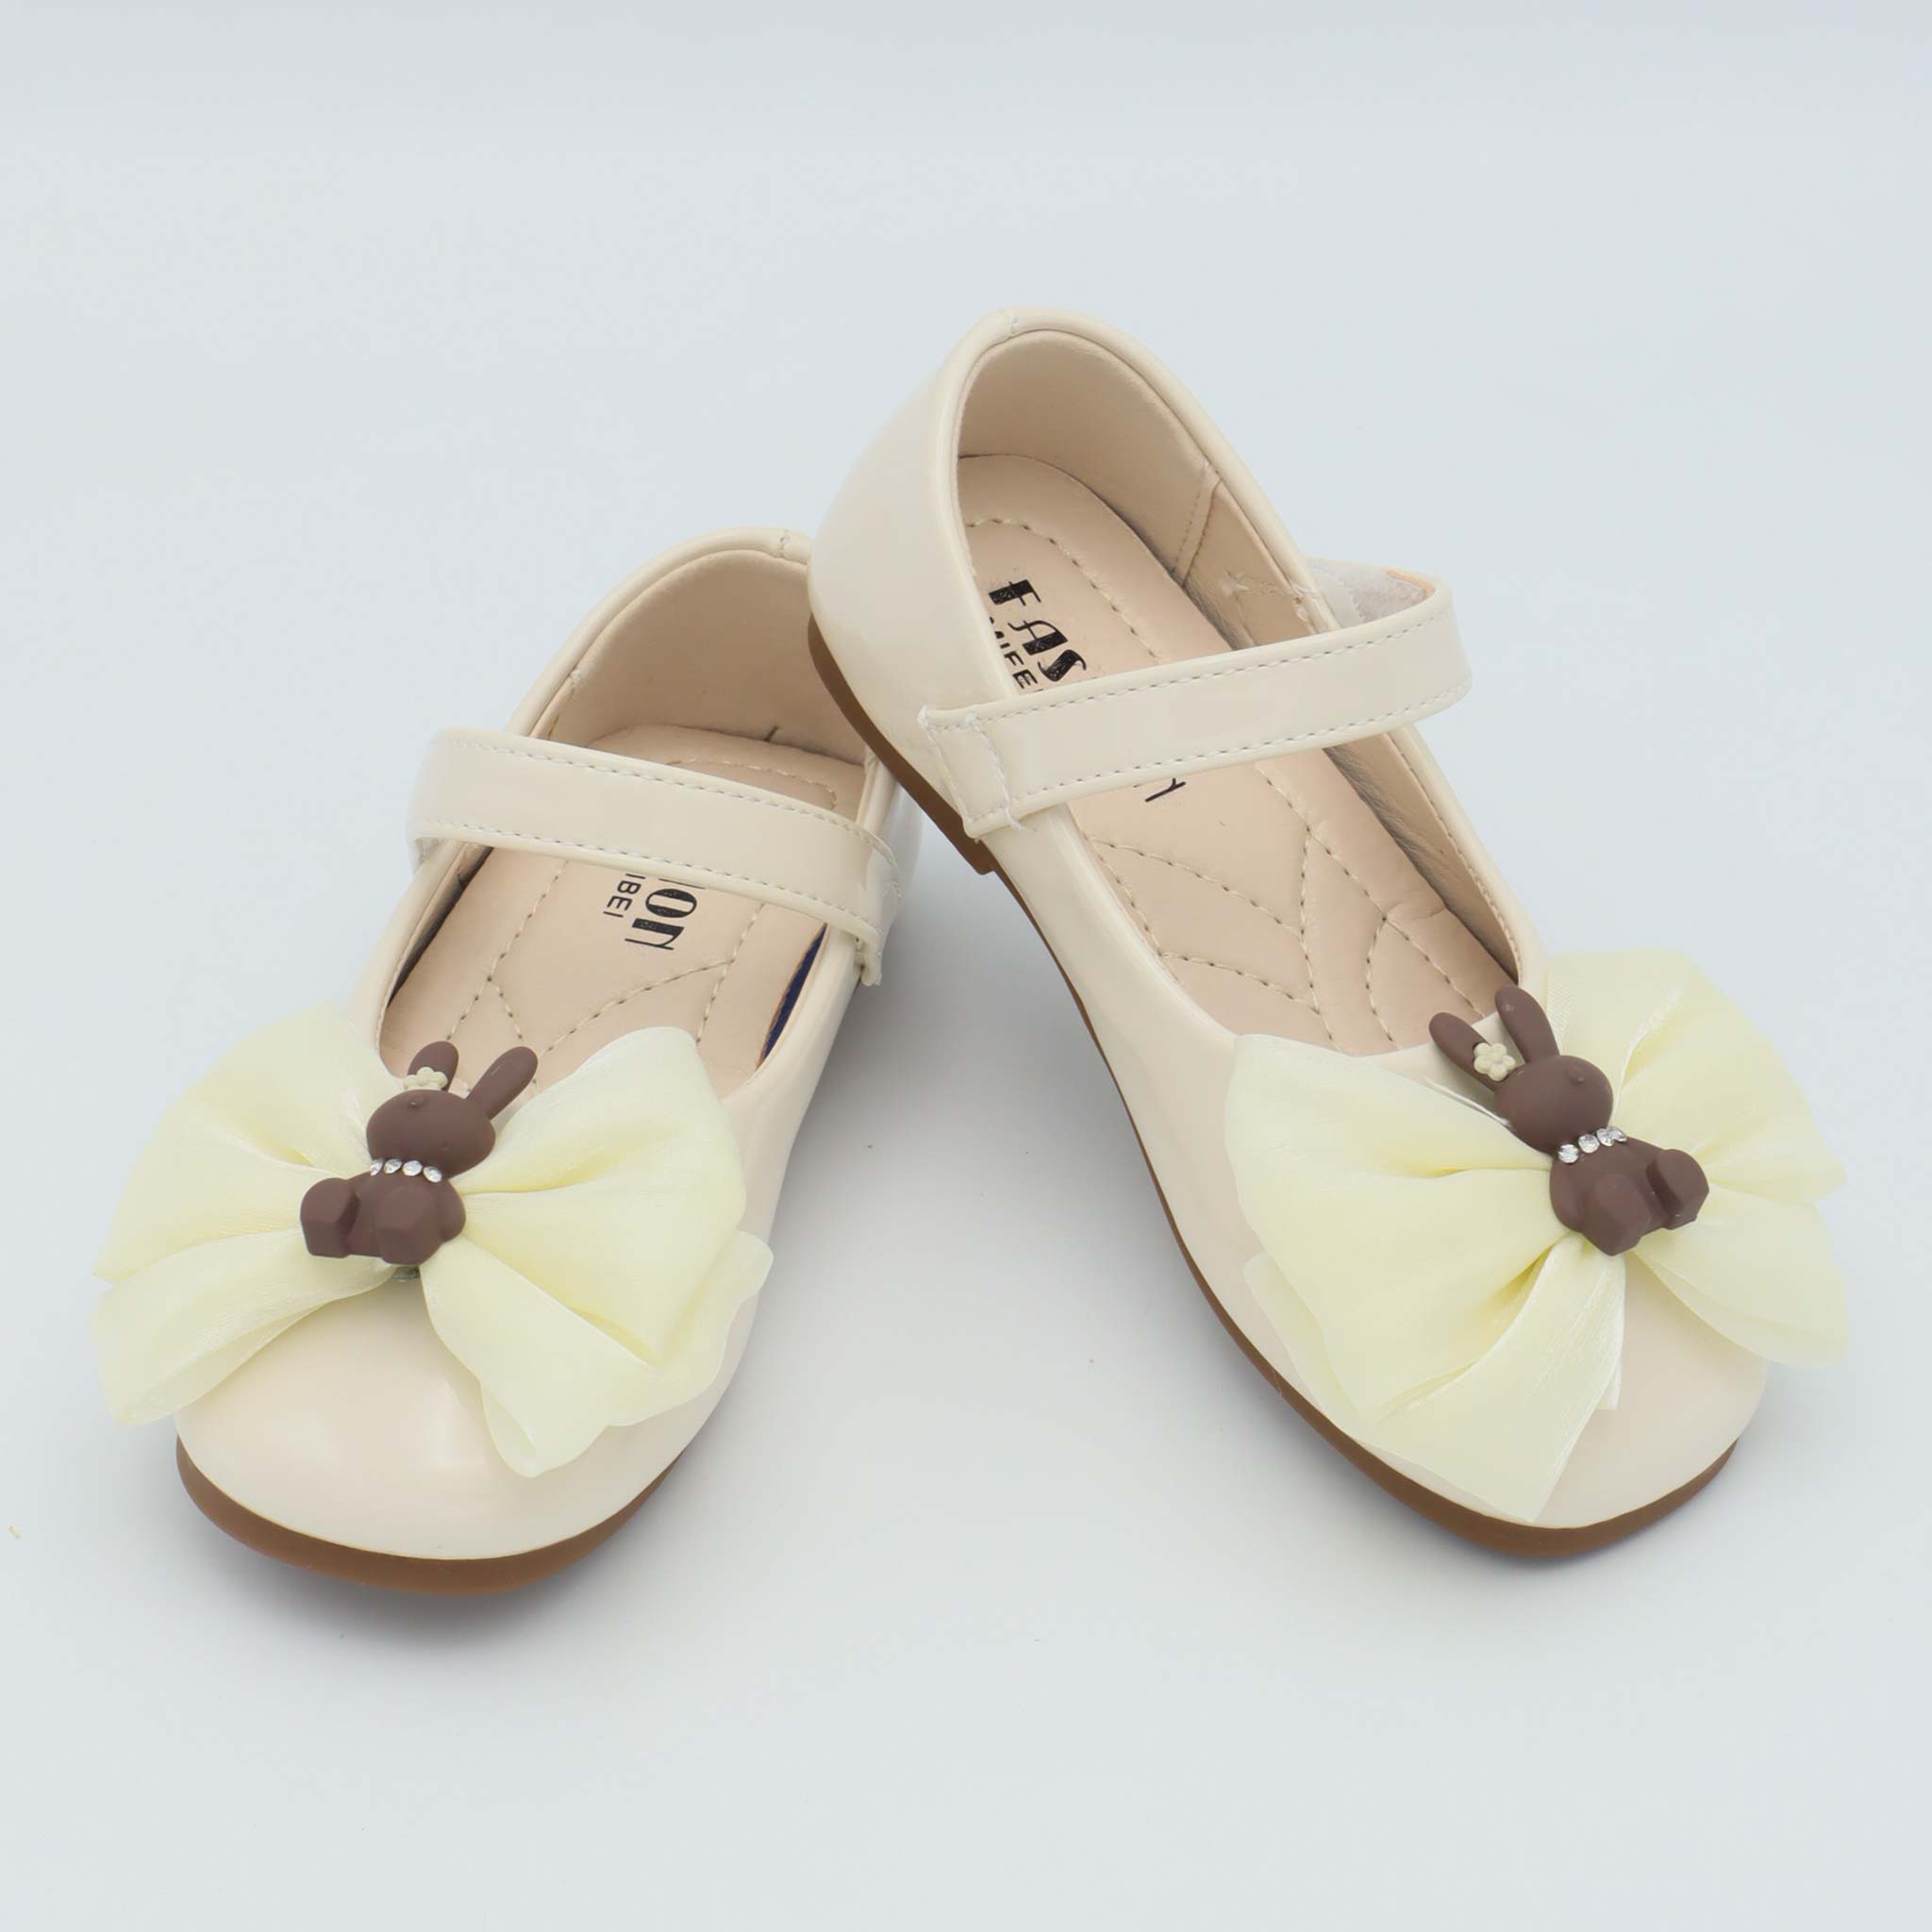 Baby Shoes White Color with Grey Rabbit Character